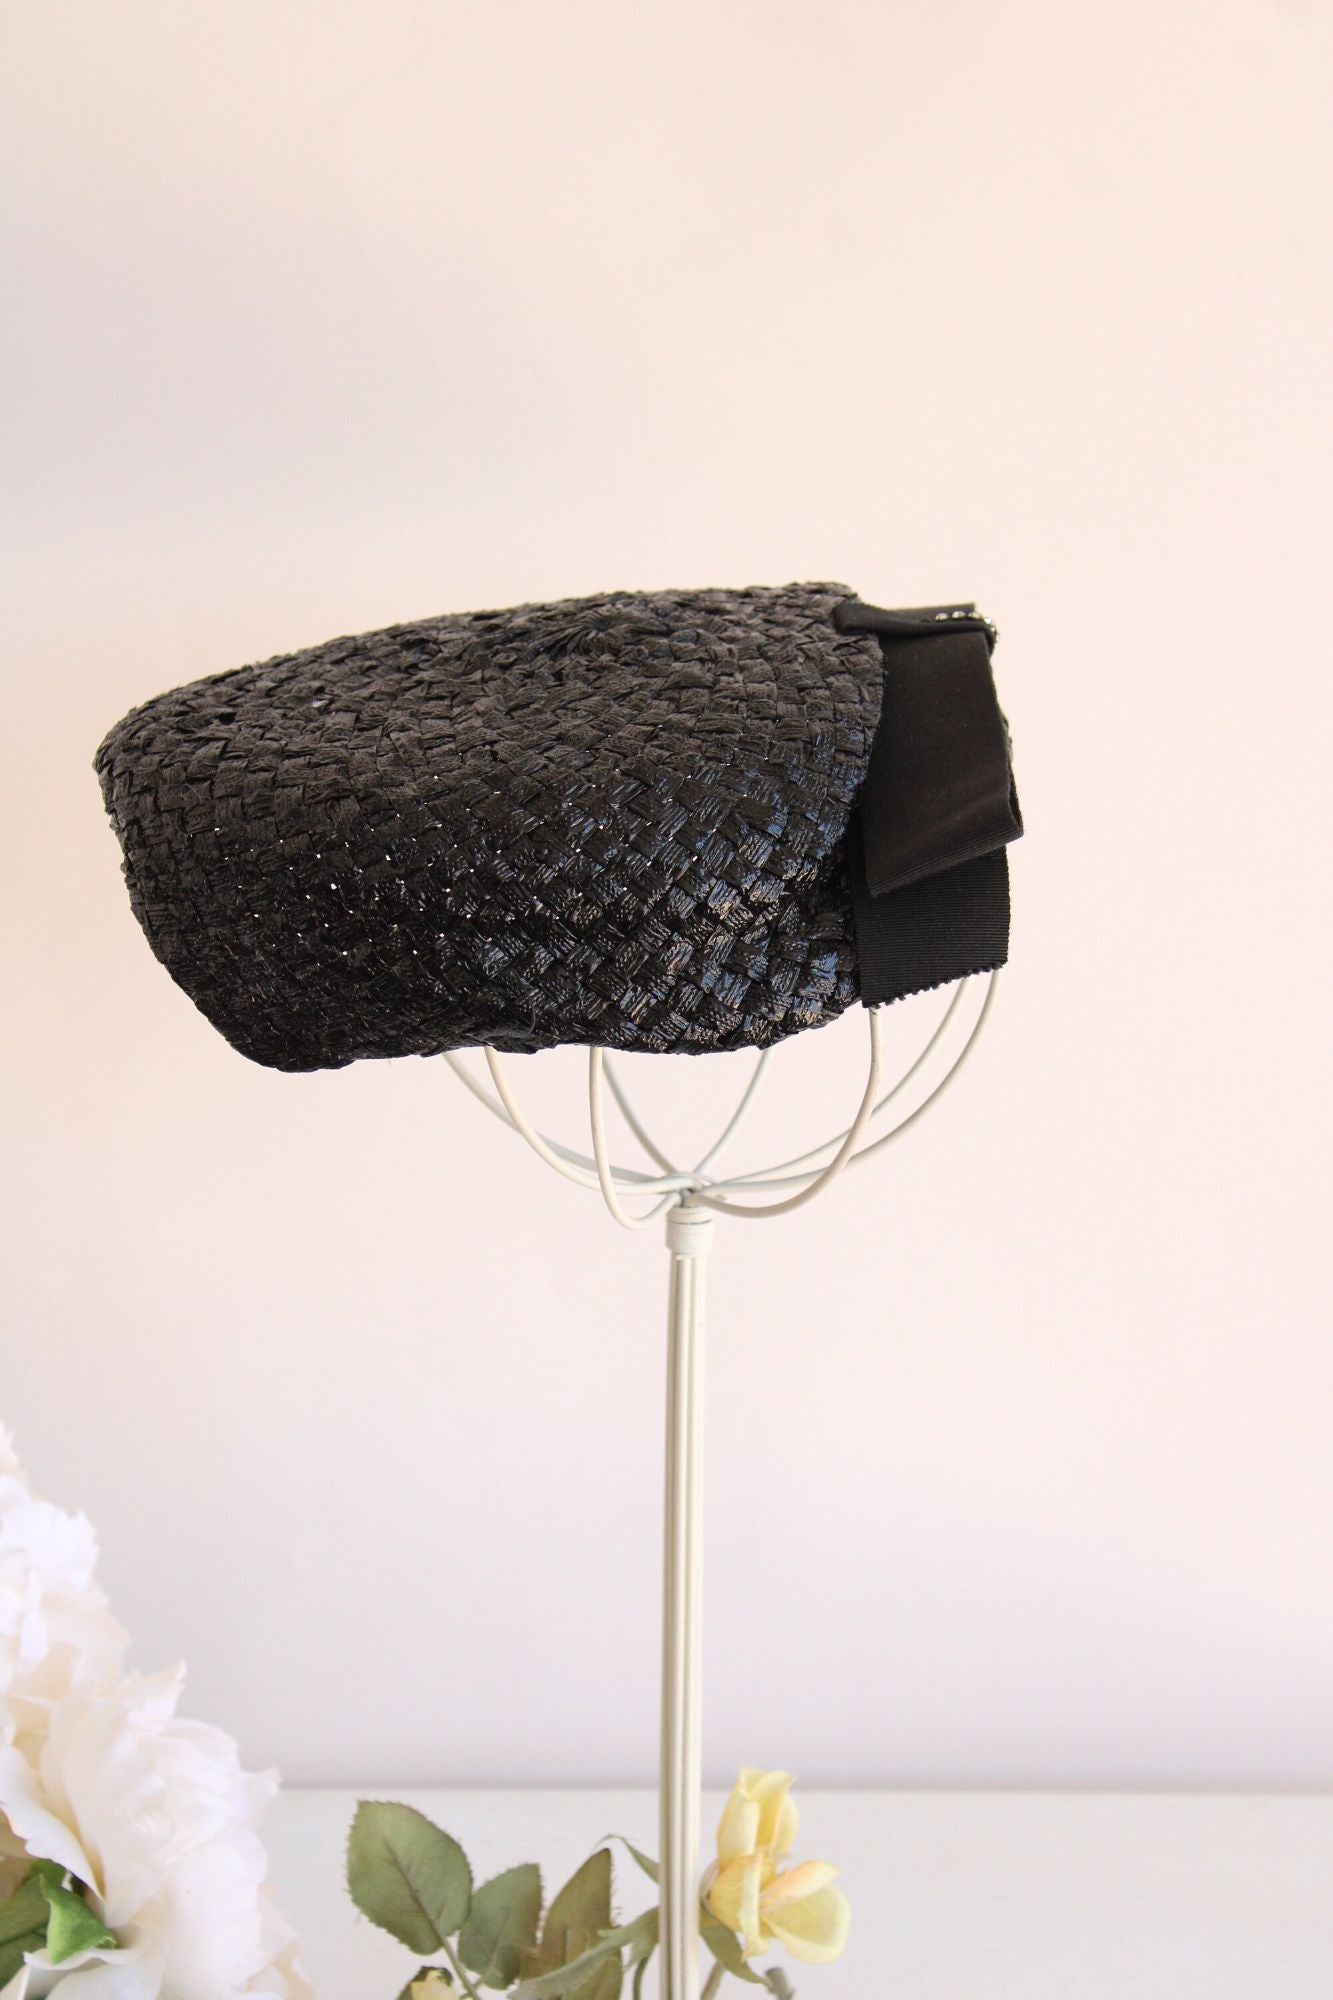 Vintage 1950s Black Straw Hat with Grosgrain Ribbon Bow and Rhinestones